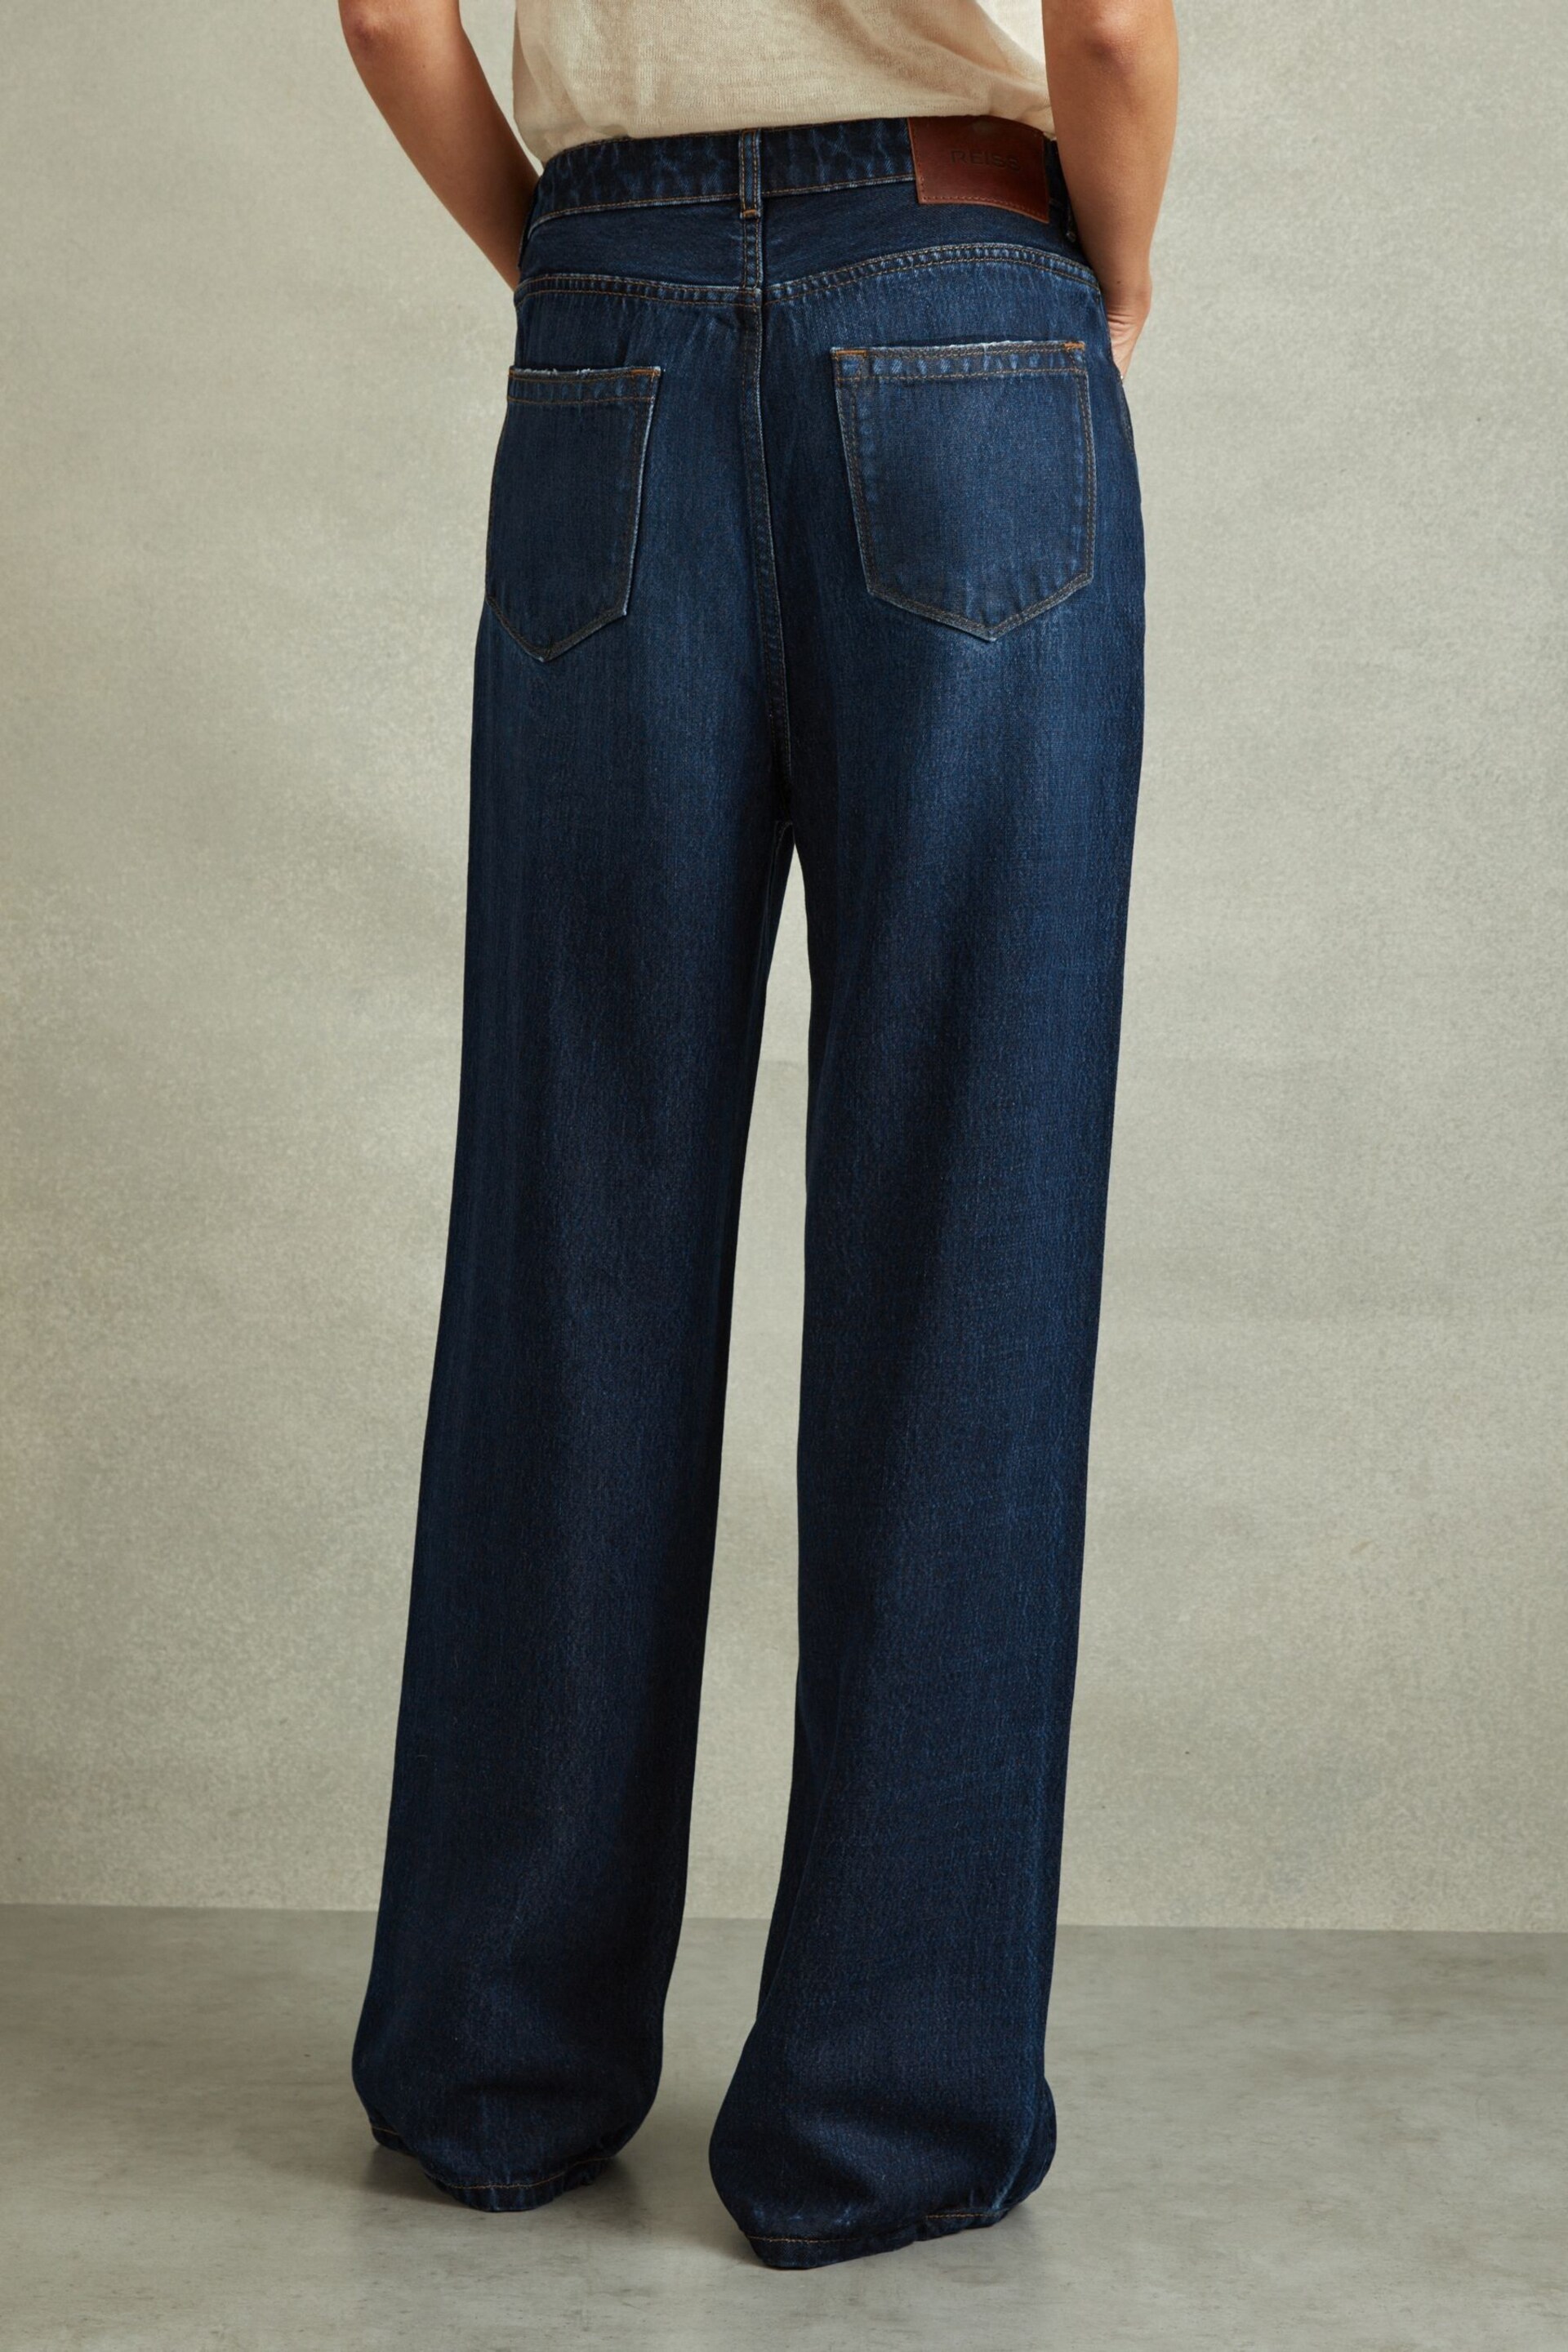 Reiss Dark Blue Lyle Petite Lightweight Viscose Blend Relaxed Jeans - Image 4 of 6